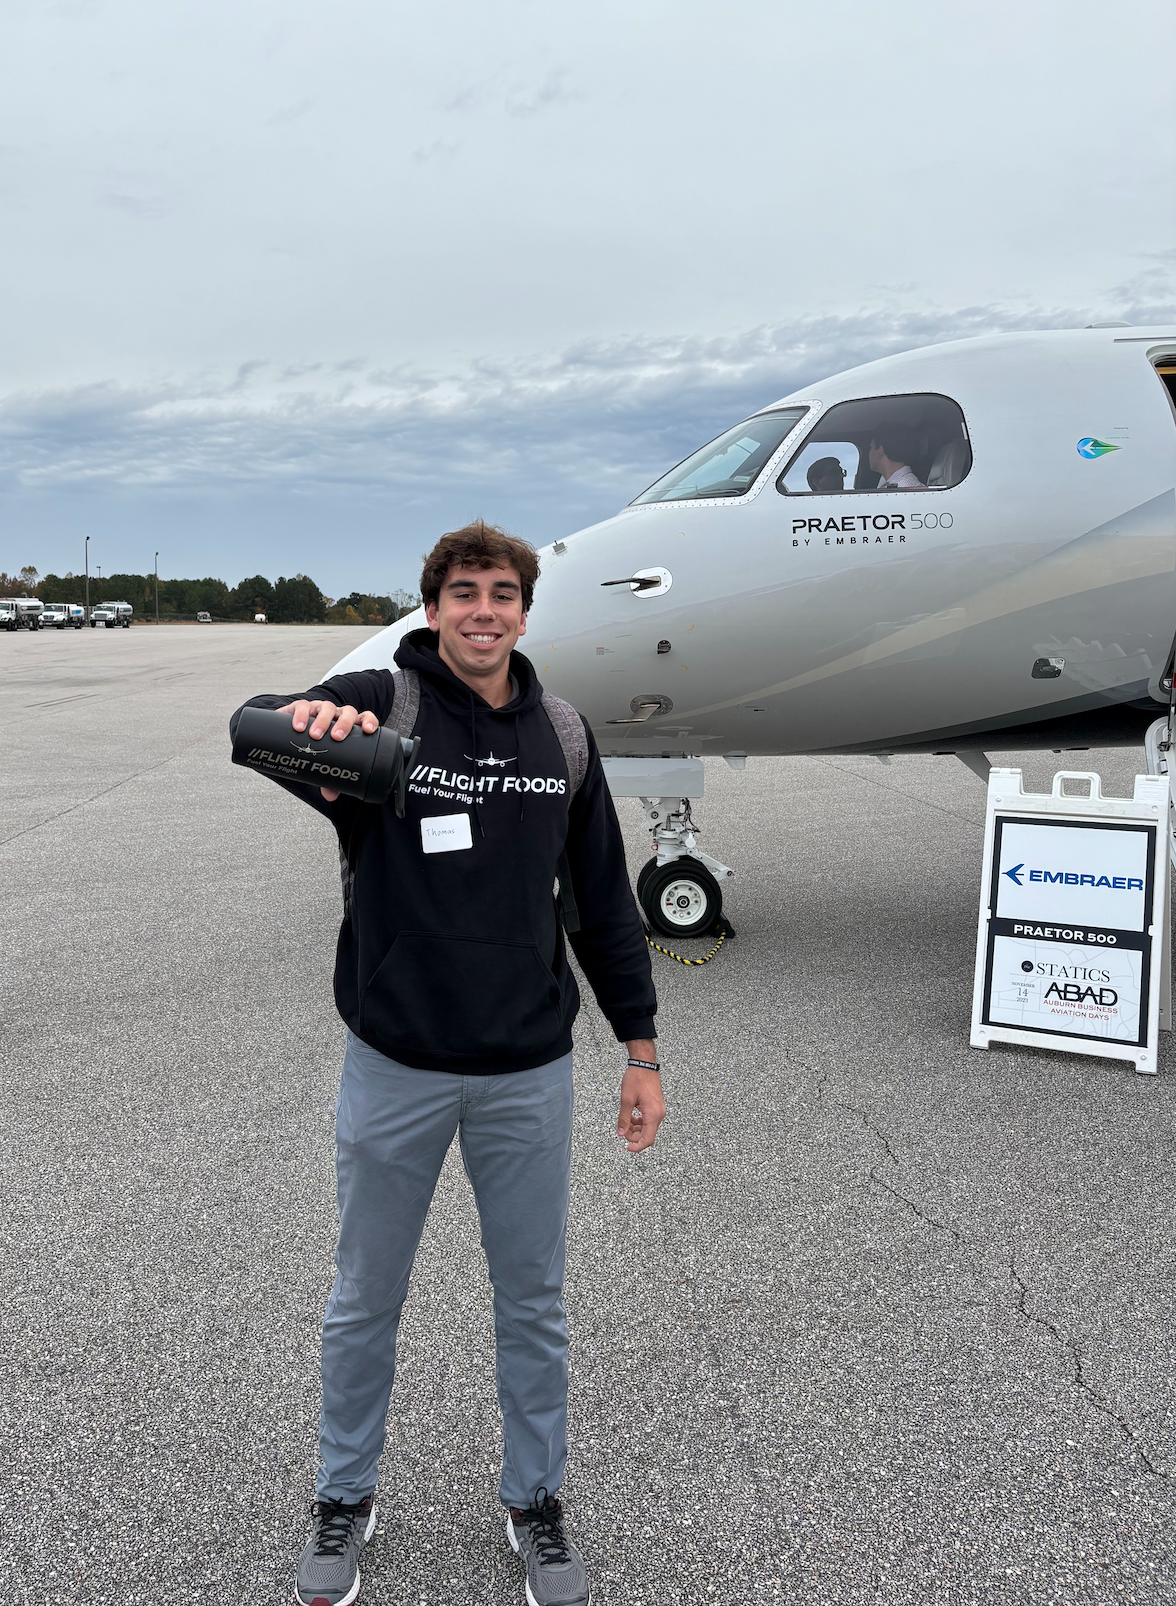 Thomas representing Flight Foods in front of a plane